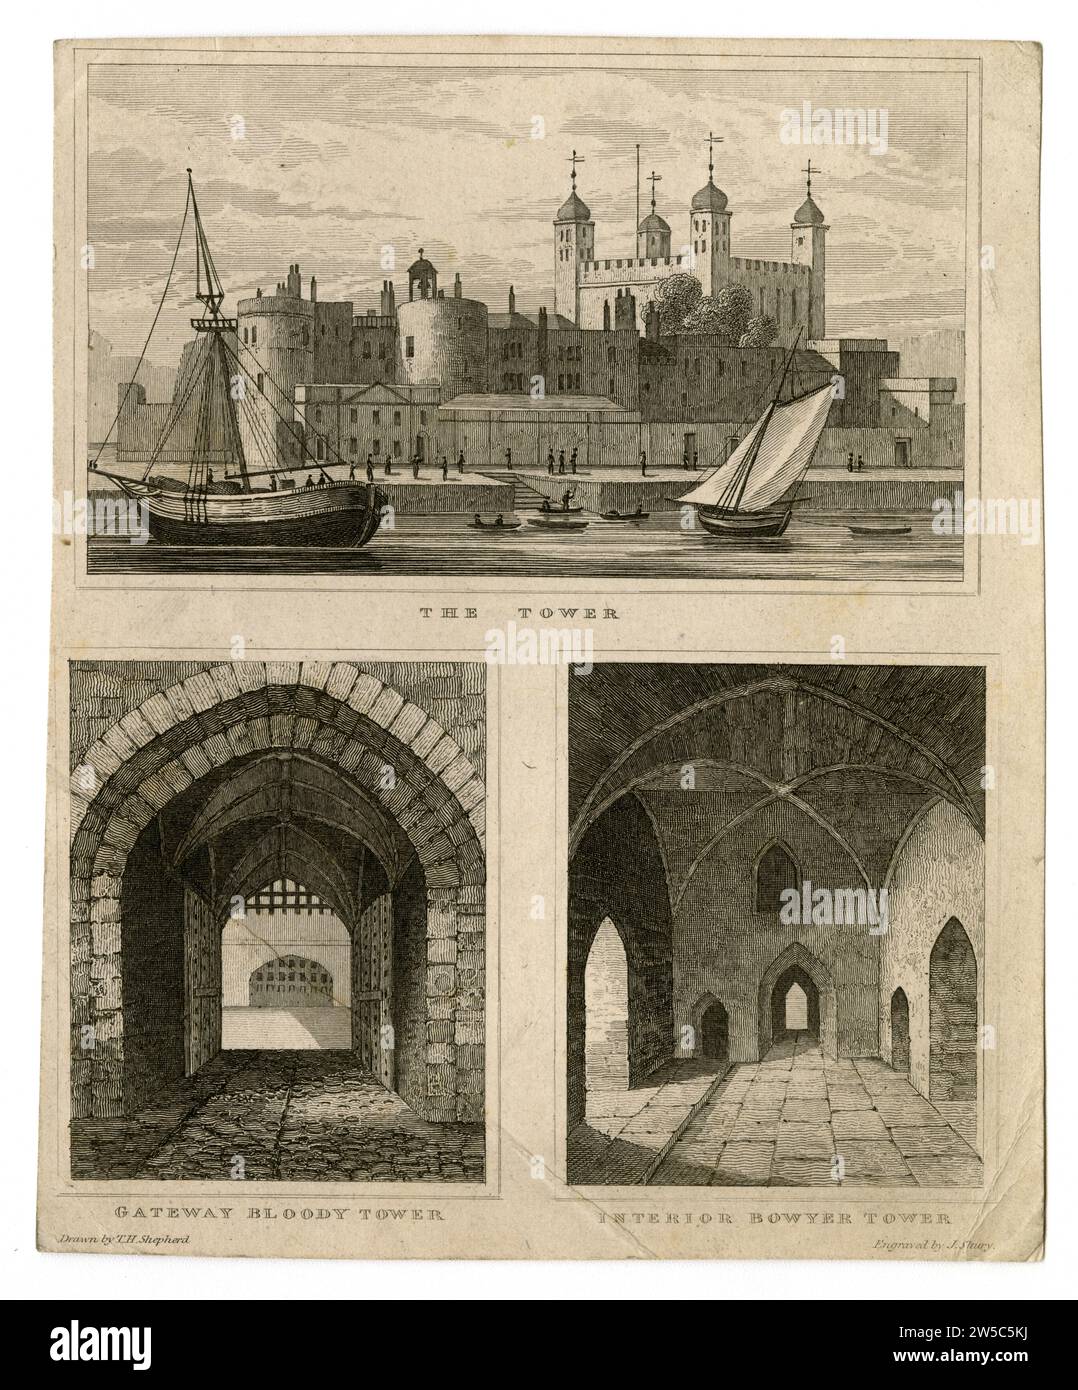 Views of the Tower of London, entitled, 'The Tower, Gateway Bloody Tower and Interior Bowyer Tower,' Engraved by J. Shury, after T. H. Shepherd Stock Photo